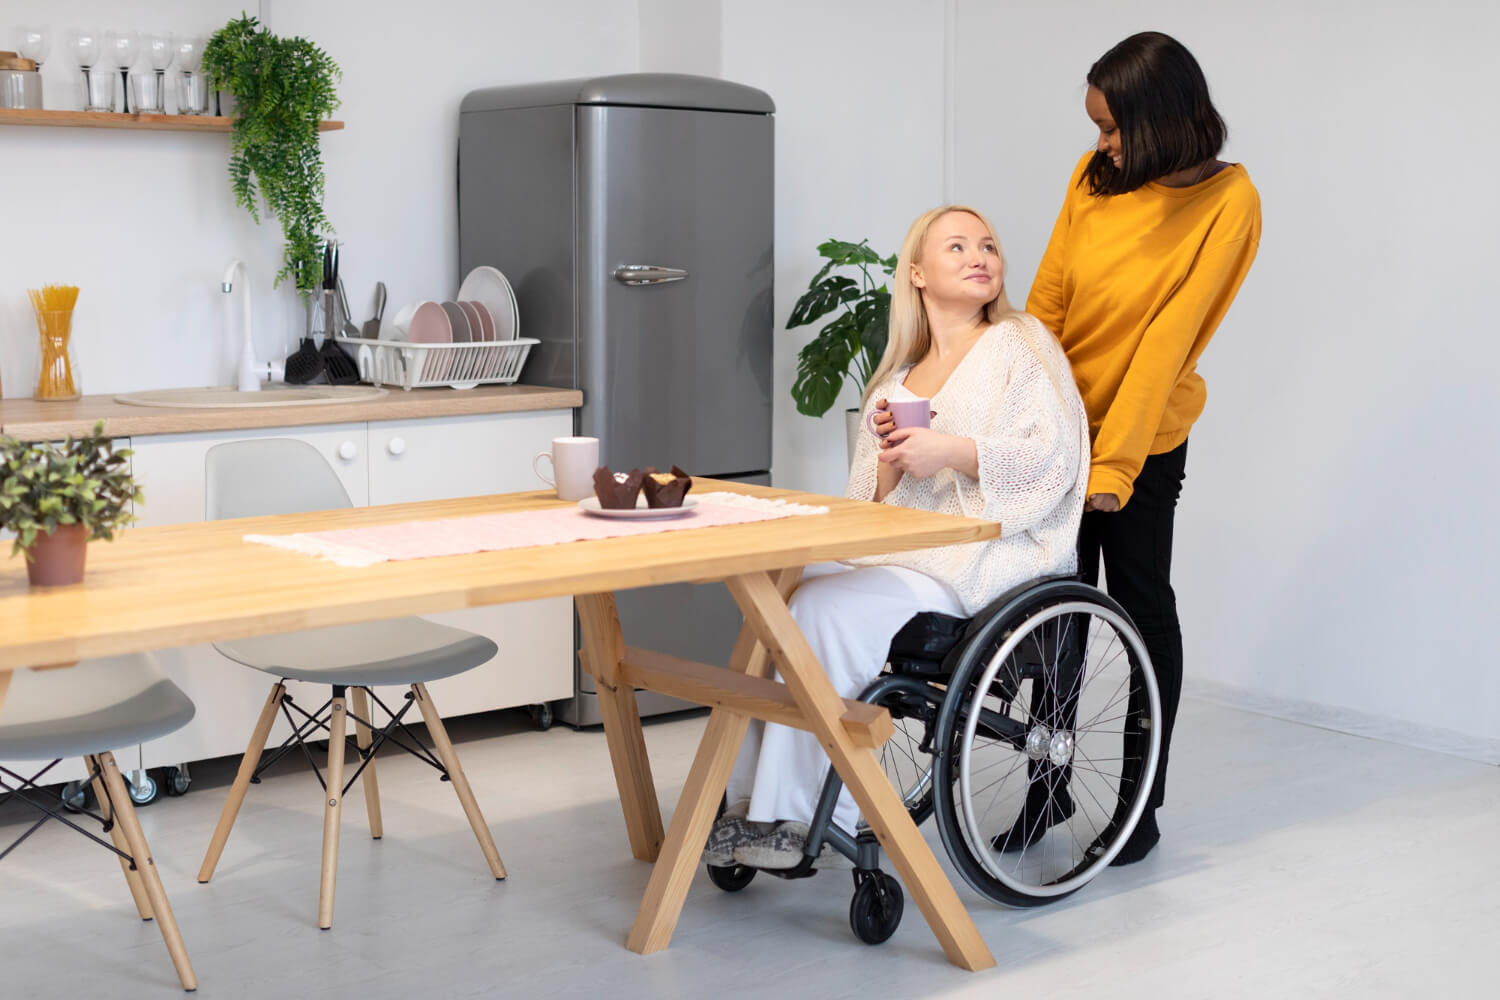 Each and every scheme provided by NDIS aims at providing quality living to the disabled ones and making sure to help them with their day-to-day expenses from Disability support services Perth